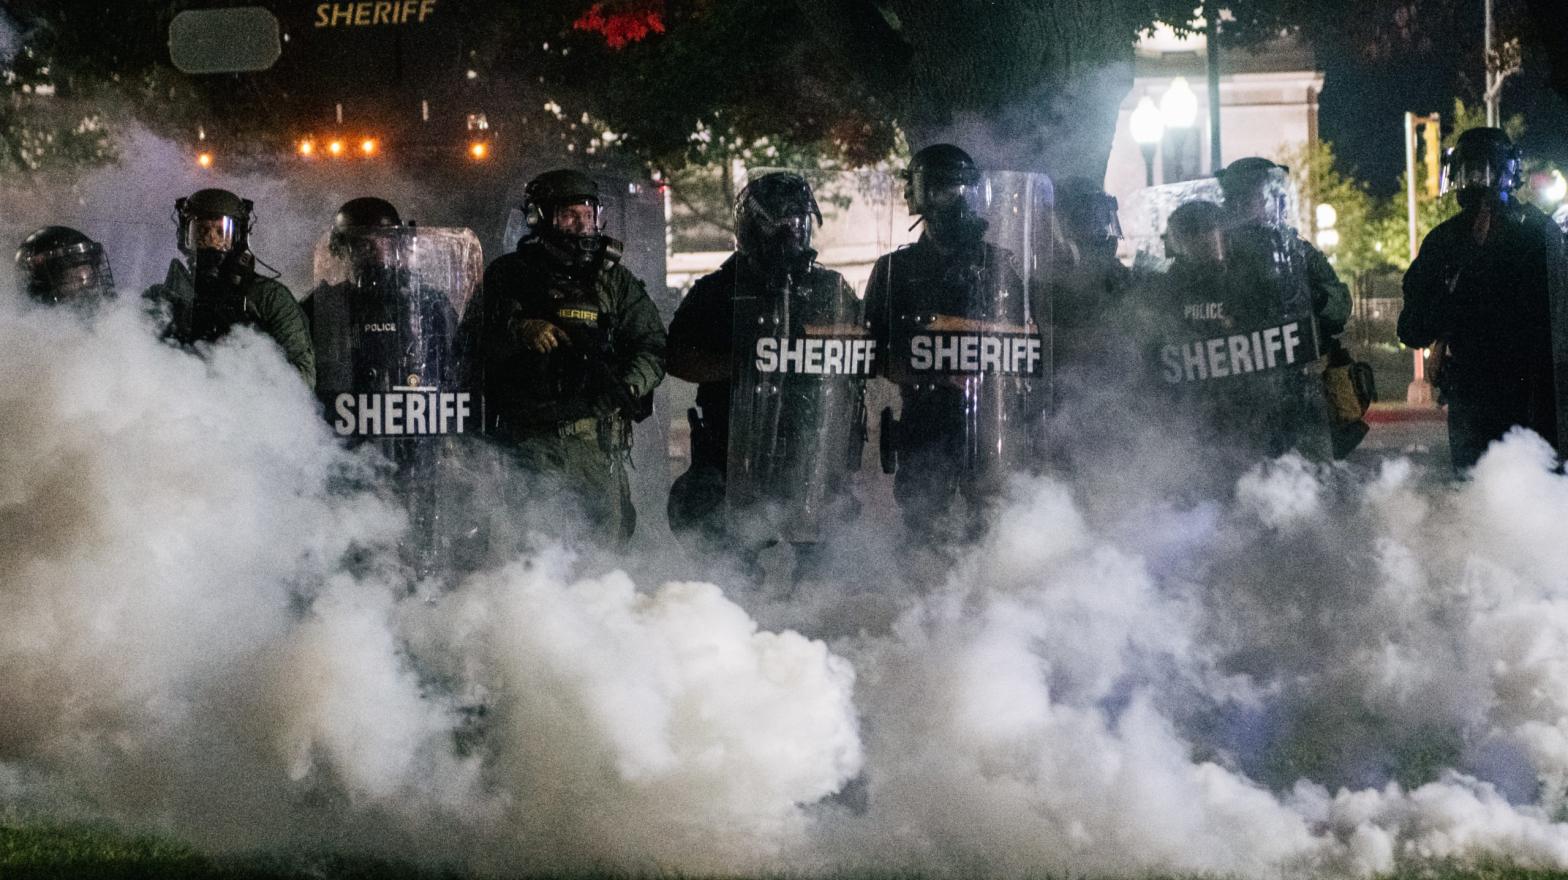 Police in Kenosha, Wisconsin on August 25, 2020. (Photo: Brandon Bell, Getty Images)